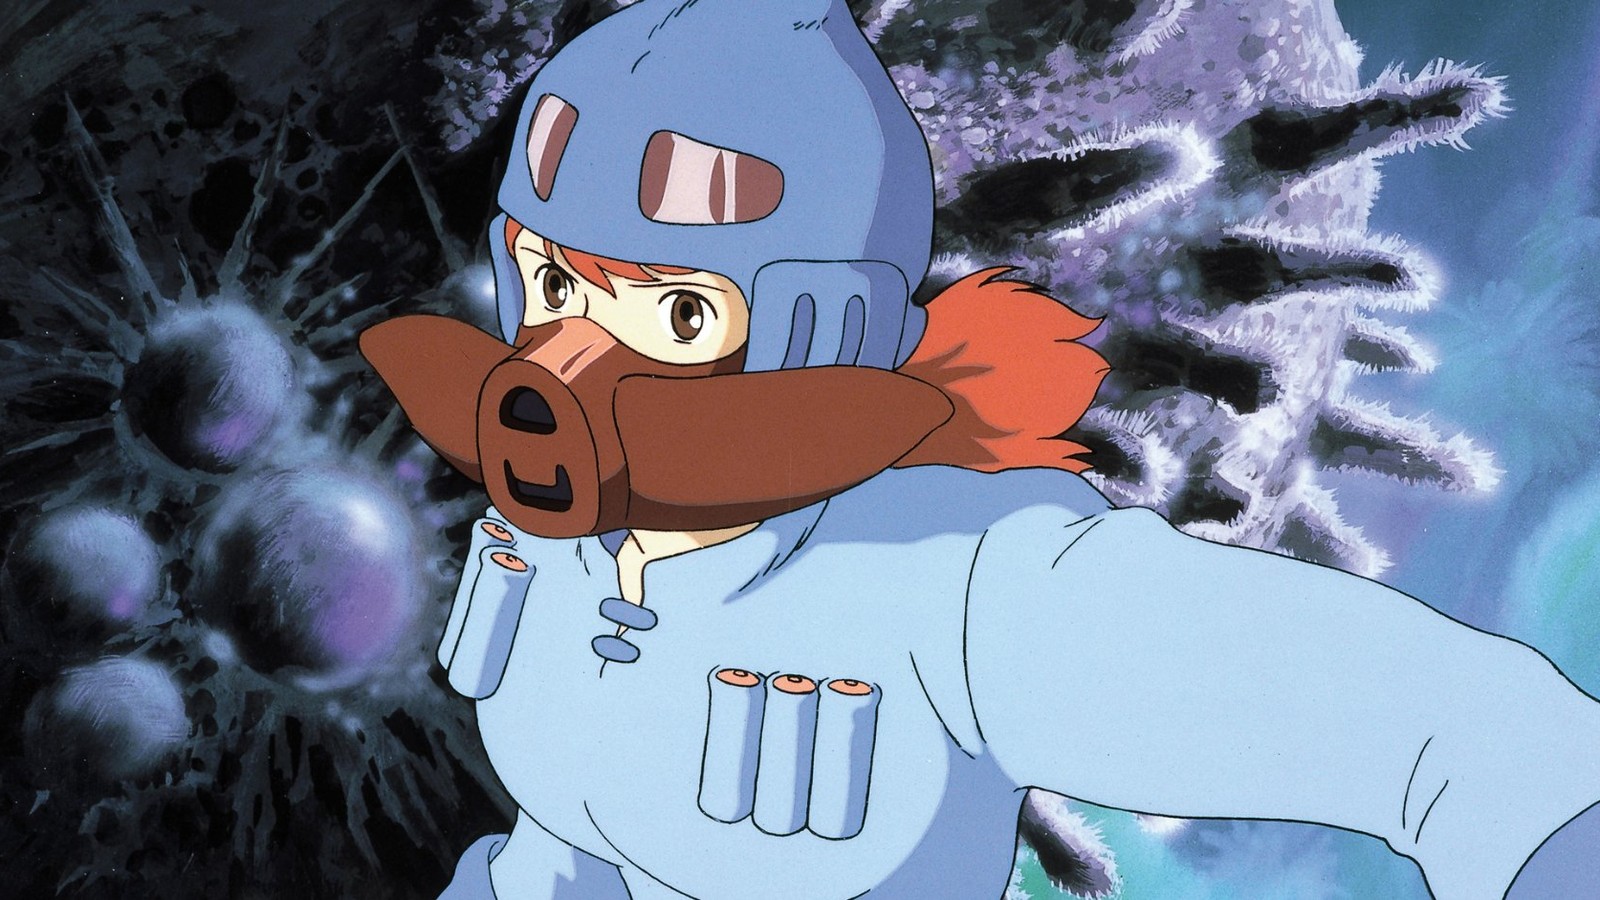 What Hayao Miyazaki's Films Taught Me About Being a Woman - The Atlantic